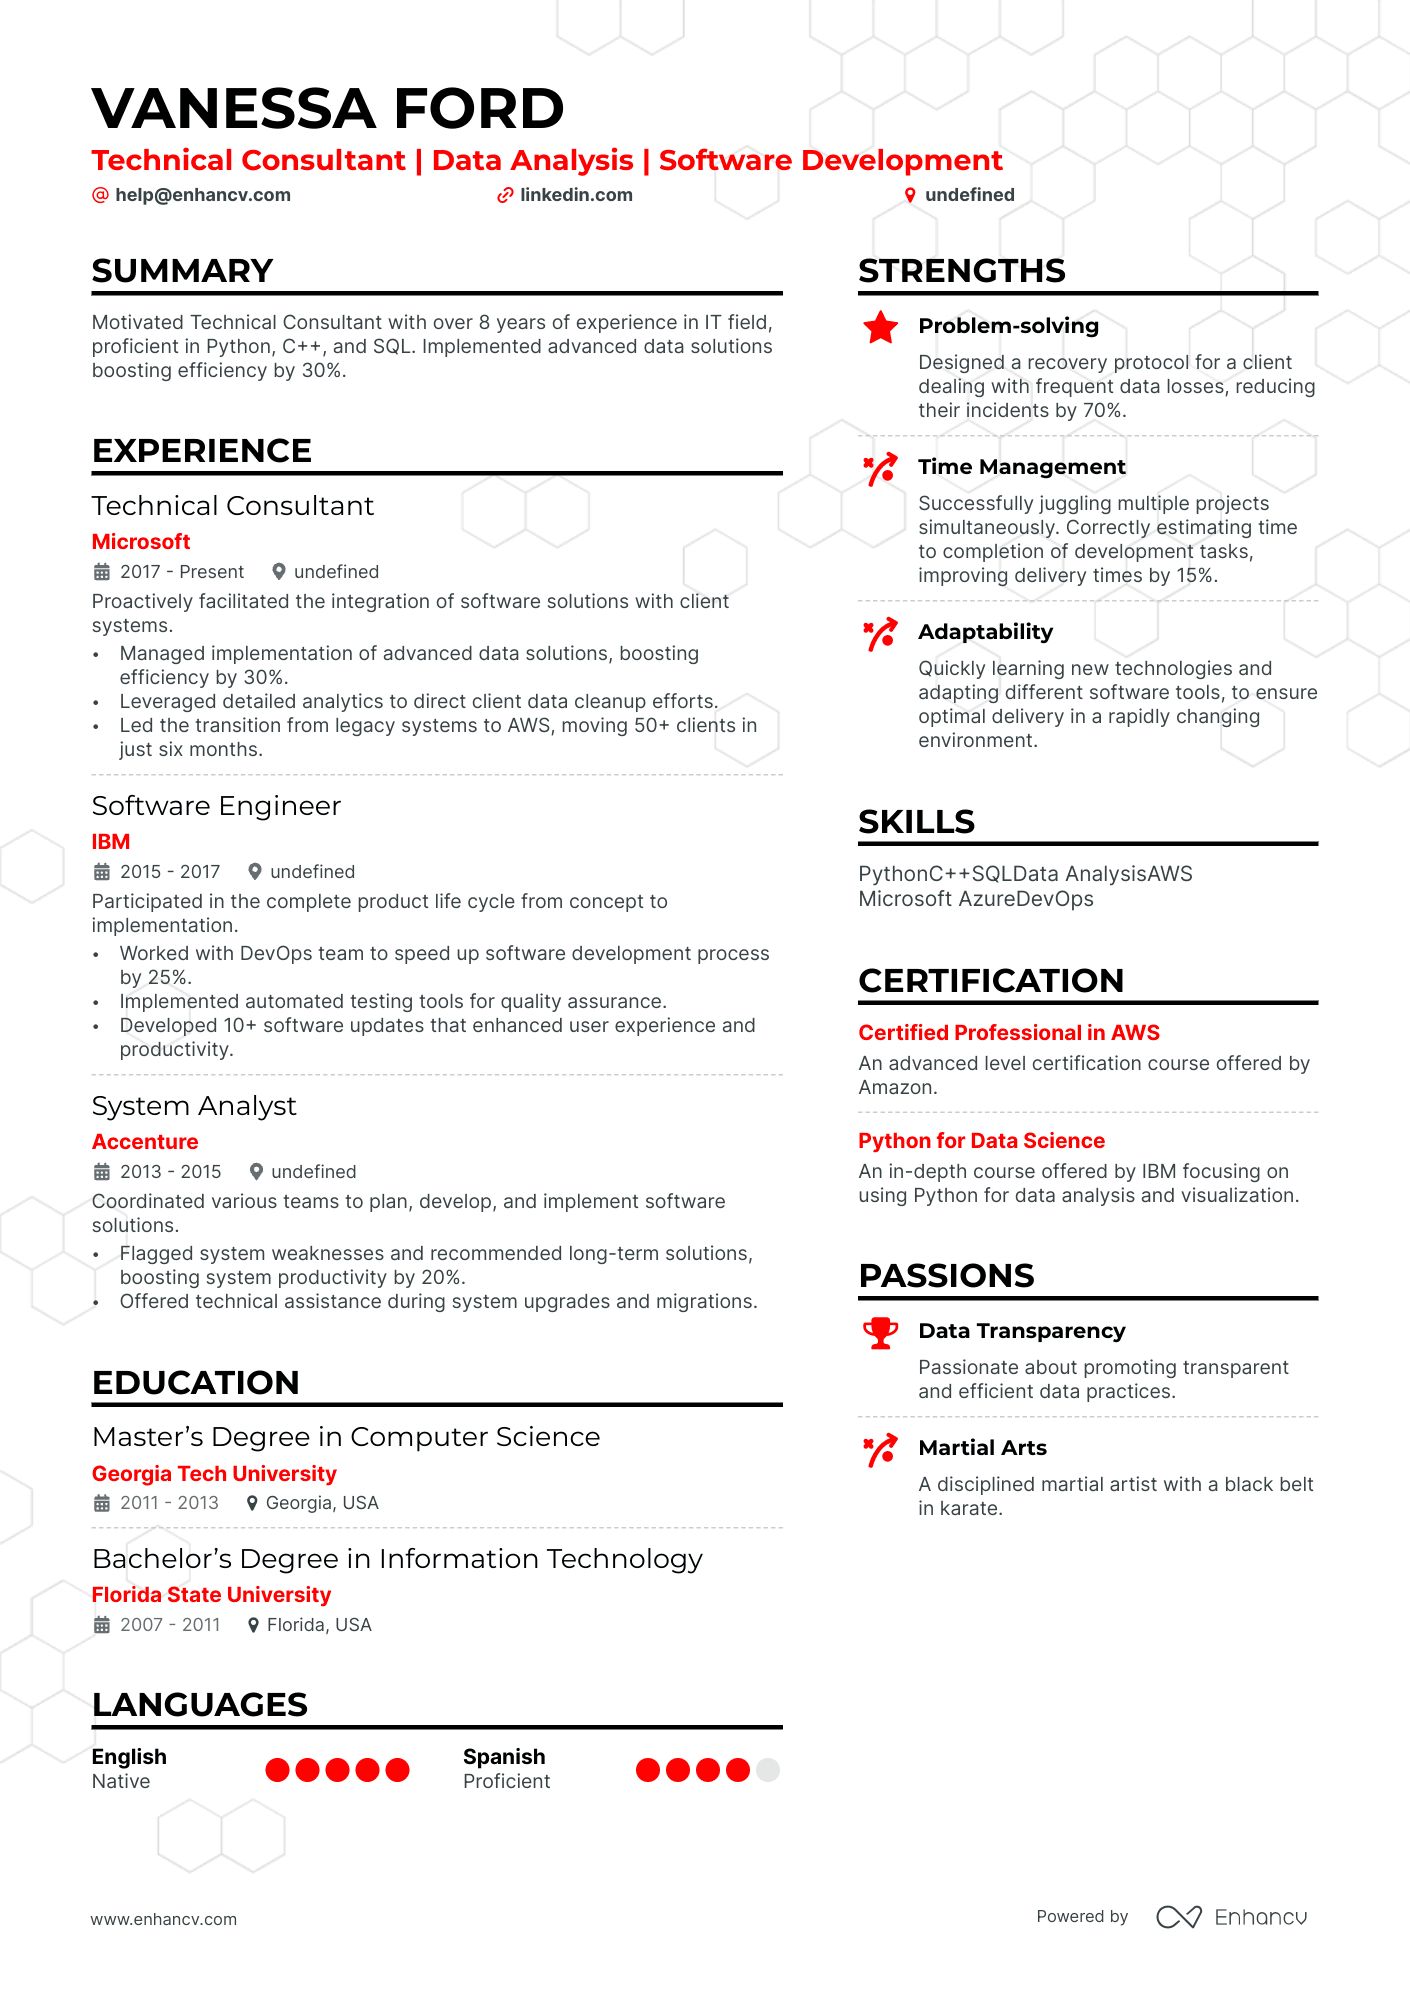 Technical Consultant resume example